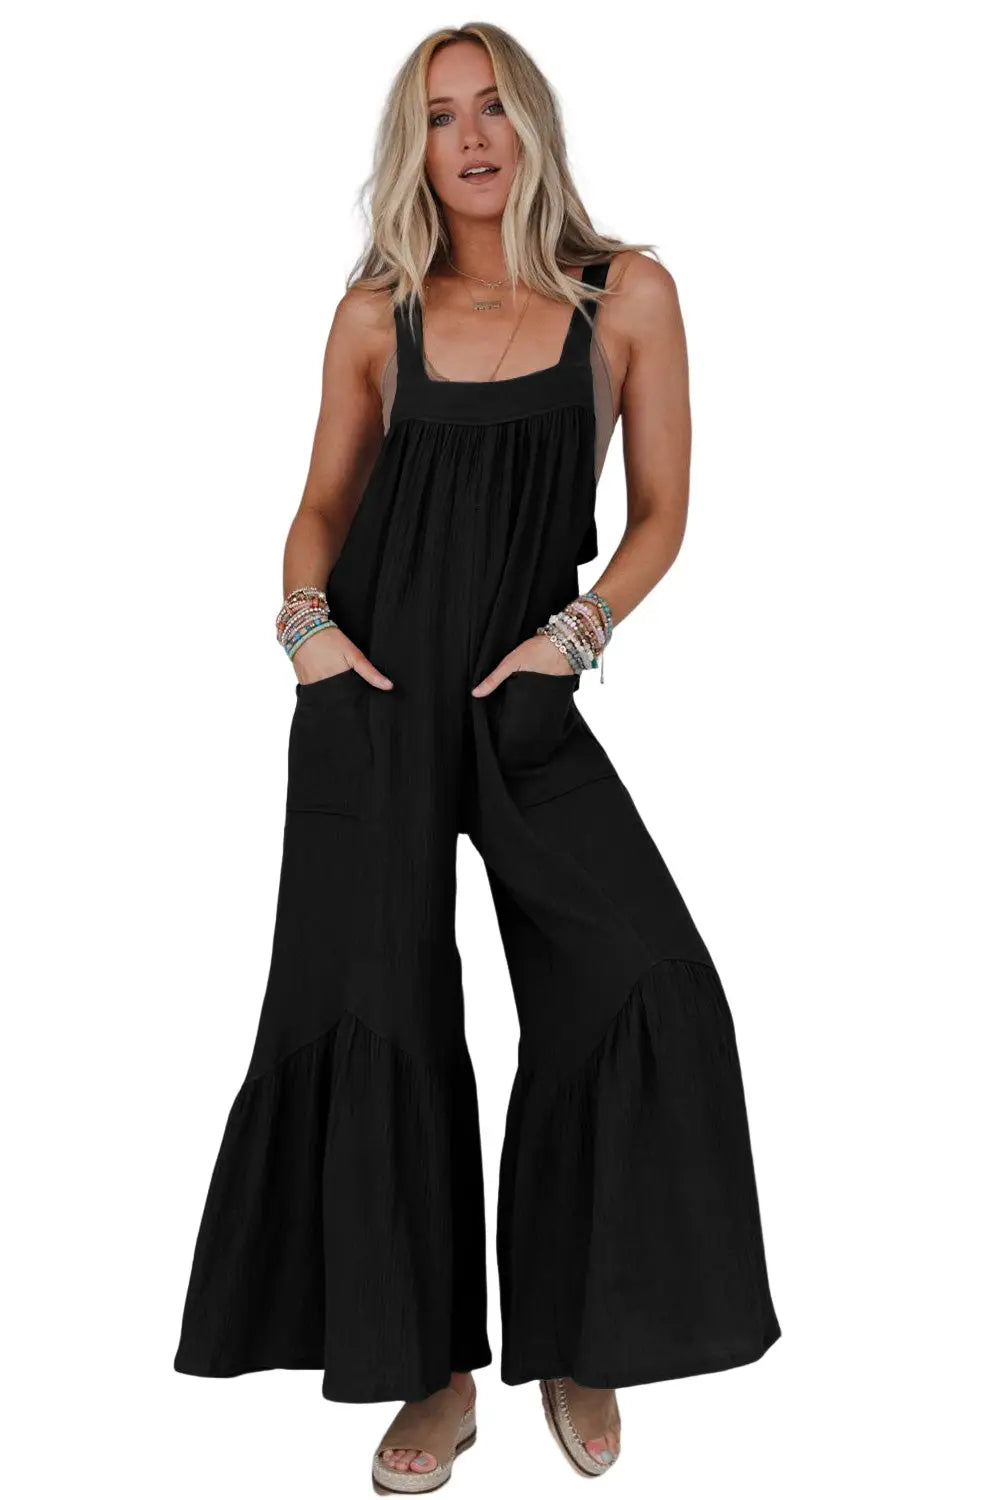 Gray wide leg ruffle jumpsuit - jumpsuits & rompers